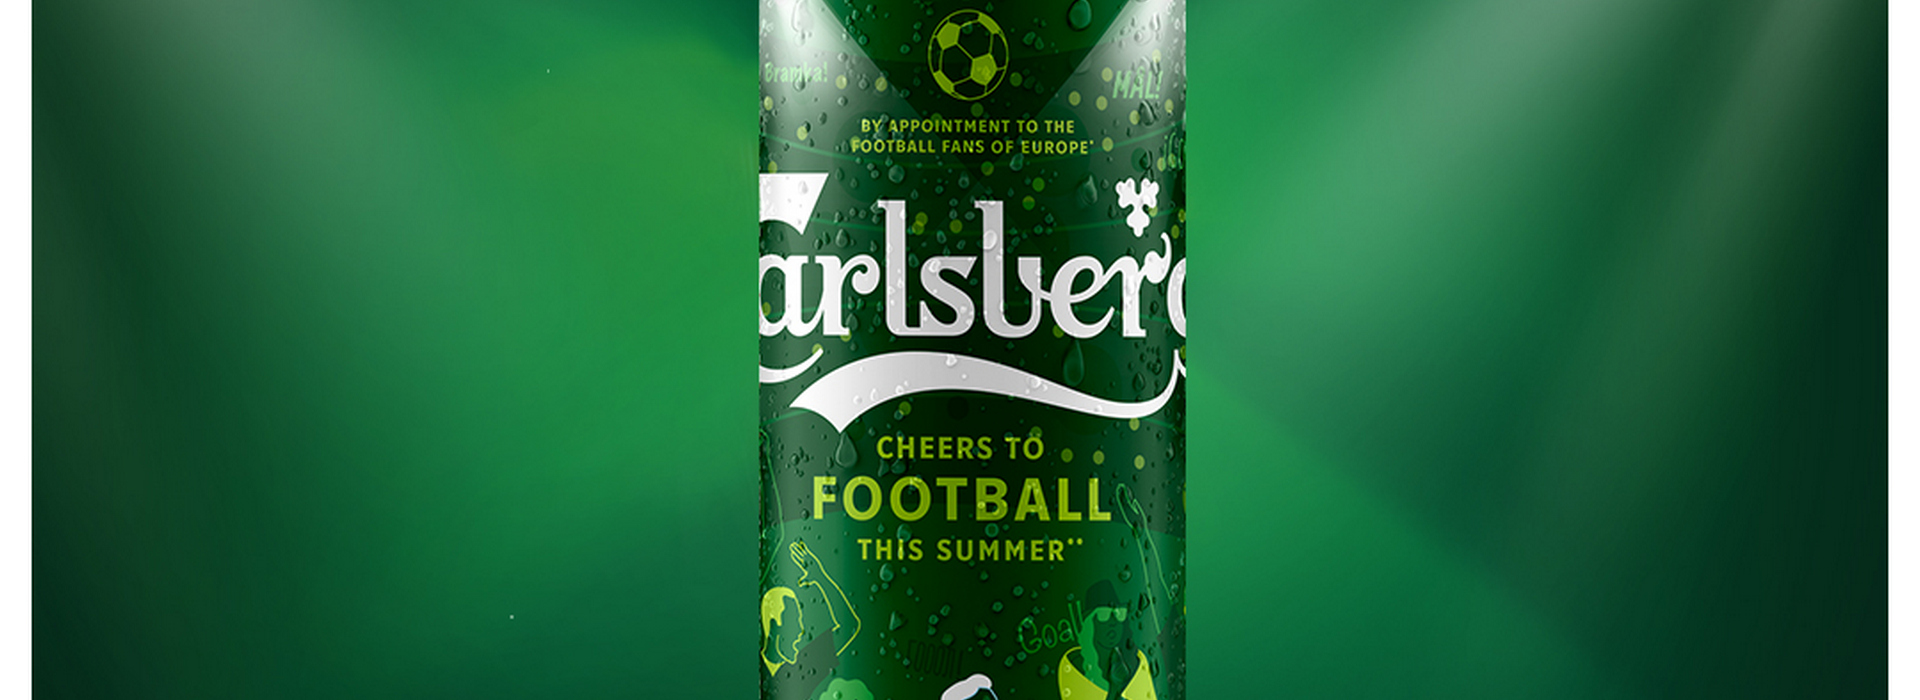 Carlsberg Releases Limited Design Banks in Honor of Football Fans